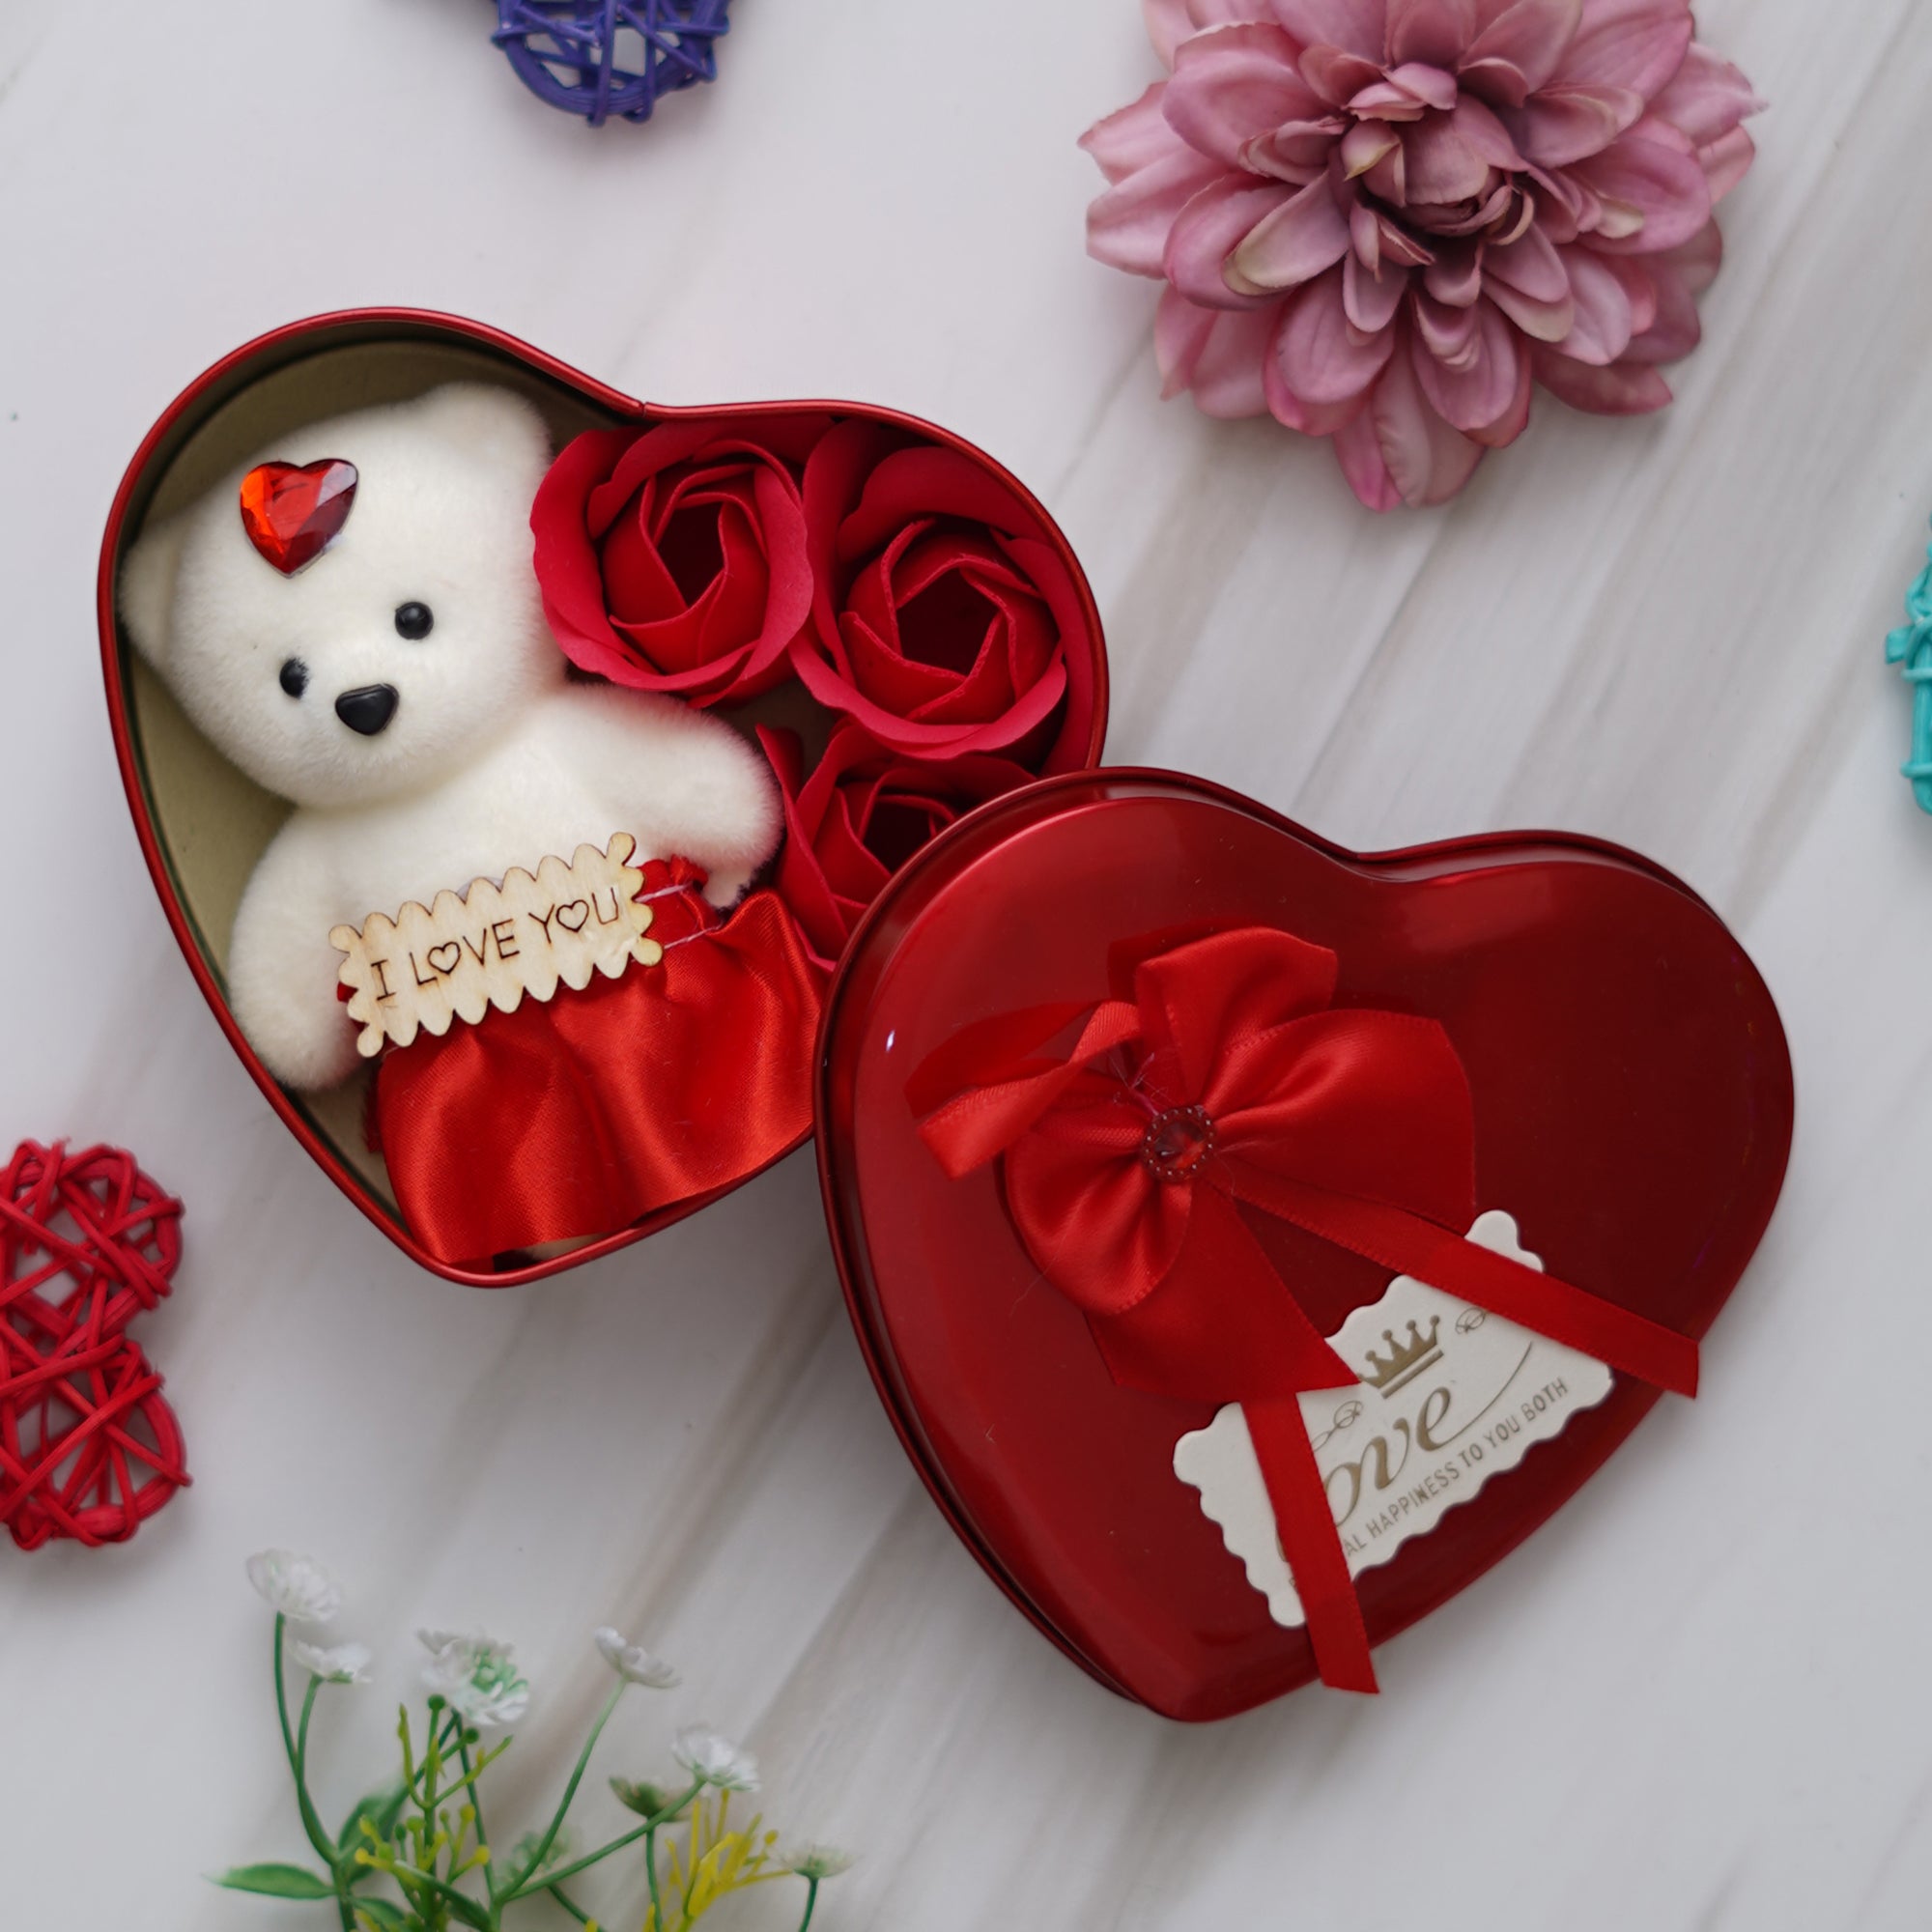 Valentine Combo of Card, Heart Shaped Gift Box Set with White Teddy and Red Roses, Wooden Box "For You" Message Bottle Set 3